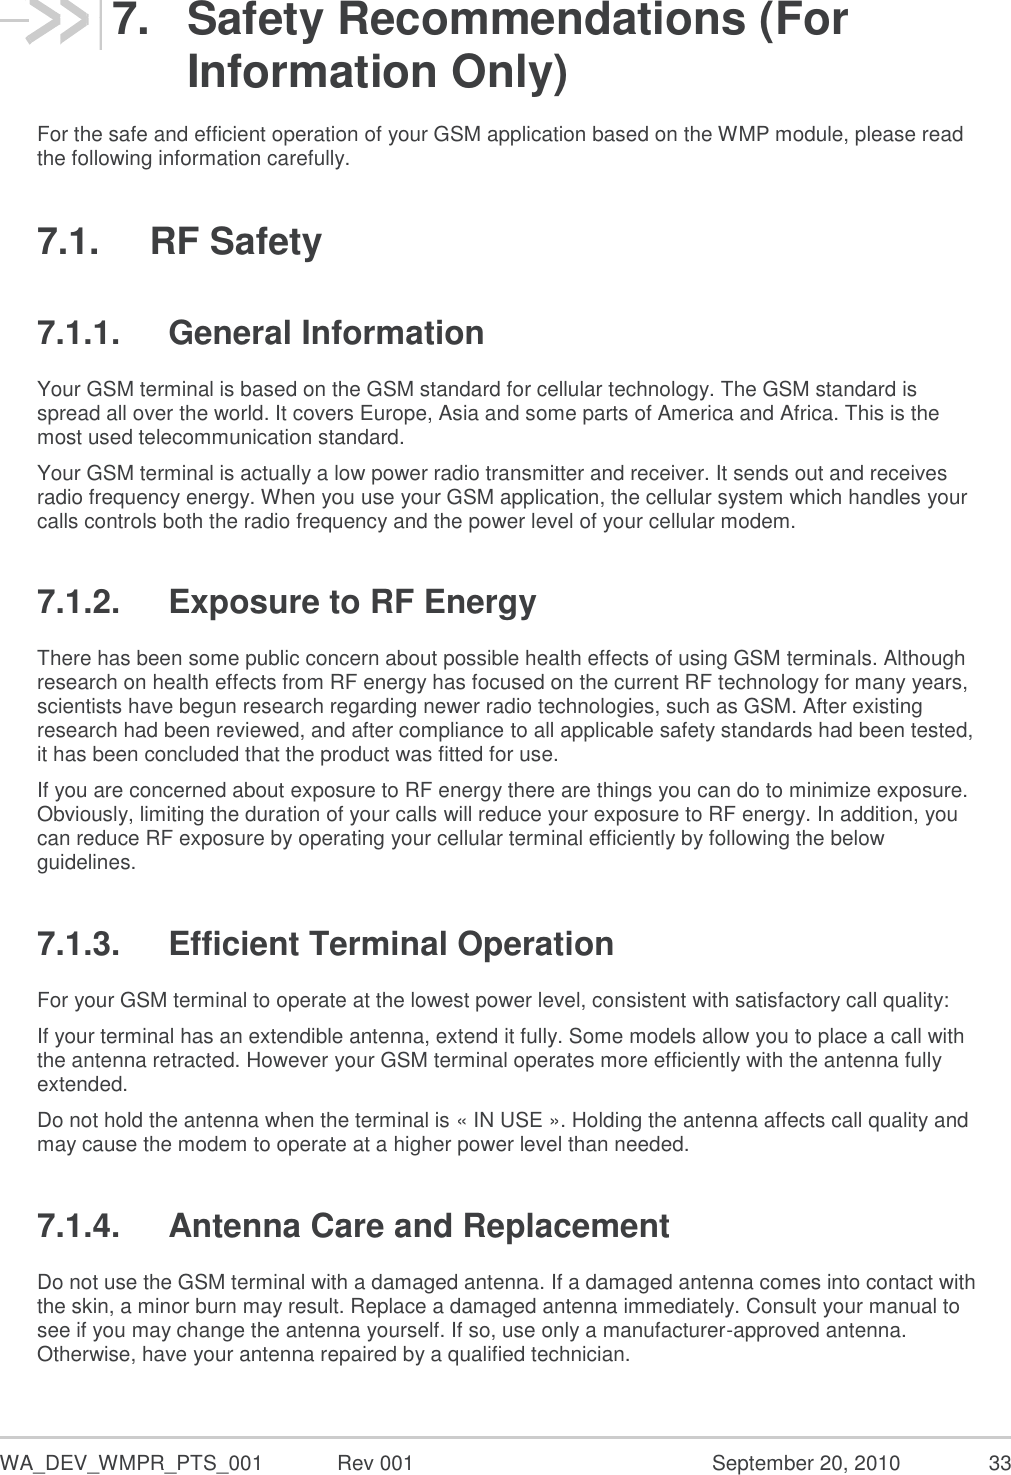  WA_DEV_WMPR_PTS_001  Rev 001  September 20, 2010  33 7.  Safety Recommendations (For Information Only) For the safe and efficient operation of your GSM application based on the WMP module, please read the following information carefully. 7.1.  RF Safety 7.1.1.  General Information Your GSM terminal is based on the GSM standard for cellular technology. The GSM standard is spread all over the world. It covers Europe, Asia and some parts of America and Africa. This is the most used telecommunication standard. Your GSM terminal is actually a low power radio transmitter and receiver. It sends out and receives radio frequency energy. When you use your GSM application, the cellular system which handles your calls controls both the radio frequency and the power level of your cellular modem. 7.1.2.  Exposure to RF Energy There has been some public concern about possible health effects of using GSM terminals. Although research on health effects from RF energy has focused on the current RF technology for many years, scientists have begun research regarding newer radio technologies, such as GSM. After existing research had been reviewed, and after compliance to all applicable safety standards had been tested, it has been concluded that the product was fitted for use. If you are concerned about exposure to RF energy there are things you can do to minimize exposure. Obviously, limiting the duration of your calls will reduce your exposure to RF energy. In addition, you can reduce RF exposure by operating your cellular terminal efficiently by following the below guidelines. 7.1.3.  Efficient Terminal Operation For your GSM terminal to operate at the lowest power level, consistent with satisfactory call quality: If your terminal has an extendible antenna, extend it fully. Some models allow you to place a call with the antenna retracted. However your GSM terminal operates more efficiently with the antenna fully extended. Do not hold the antenna when the terminal is « IN USE ». Holding the antenna affects call quality and may cause the modem to operate at a higher power level than needed. 7.1.4.  Antenna Care and Replacement Do not use the GSM terminal with a damaged antenna. If a damaged antenna comes into contact with the skin, a minor burn may result. Replace a damaged antenna immediately. Consult your manual to see if you may change the antenna yourself. If so, use only a manufacturer-approved antenna. Otherwise, have your antenna repaired by a qualified technician. 